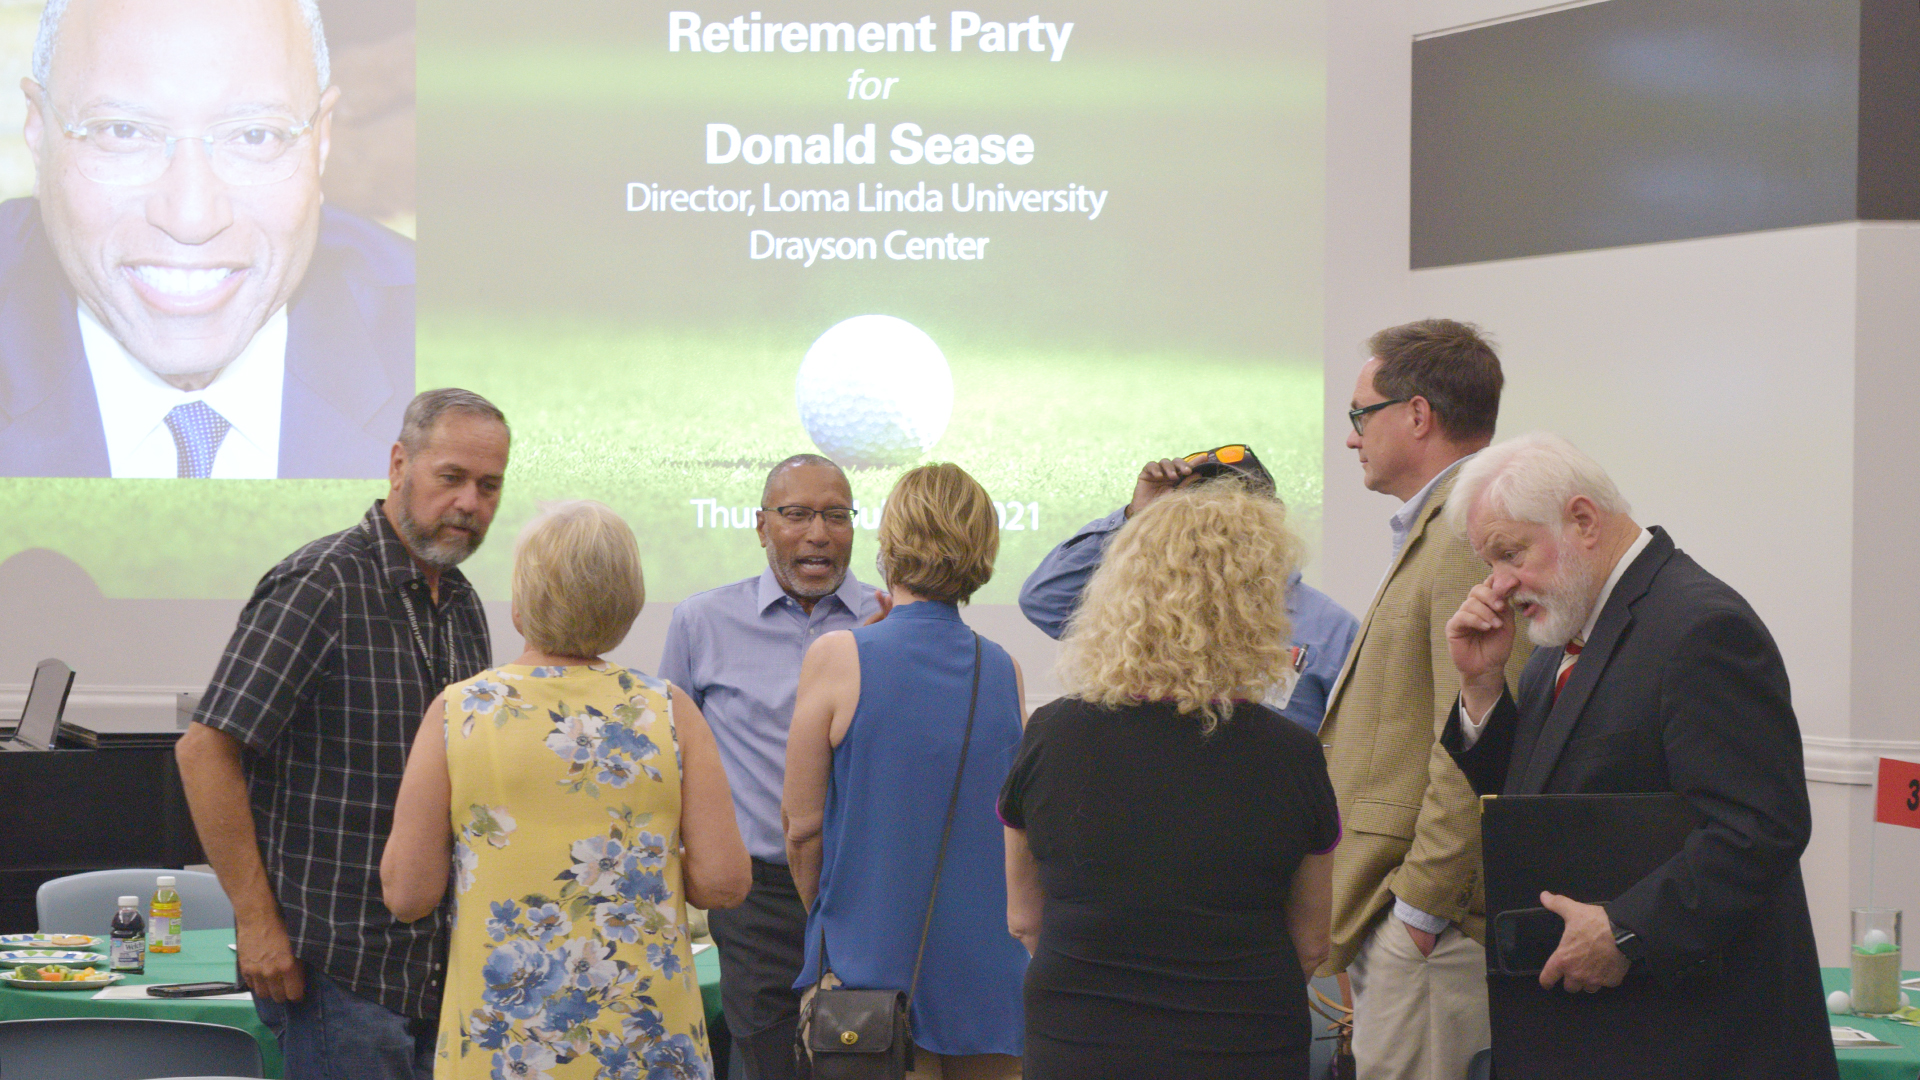 Donald Sease speaks with some of those attending his retirement party.